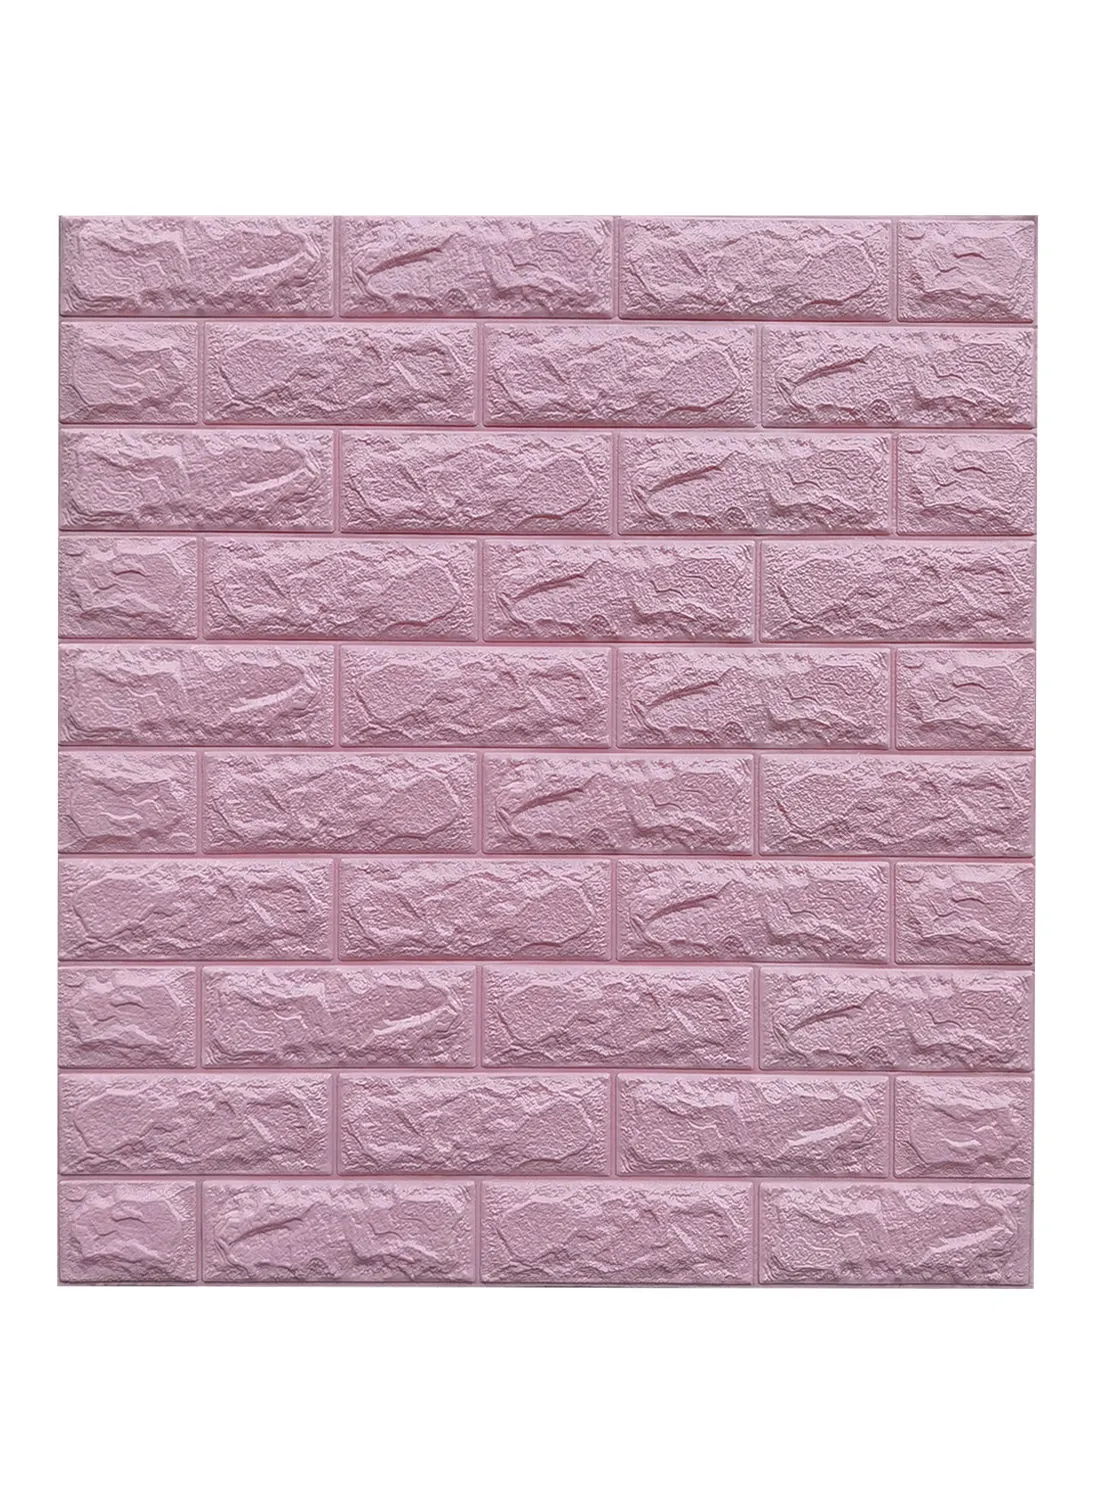 Switch Self Adhesive 3D Foam Set Of 10 Wallpaper Premium Quality For Home Office Restaurant Self Install Pink